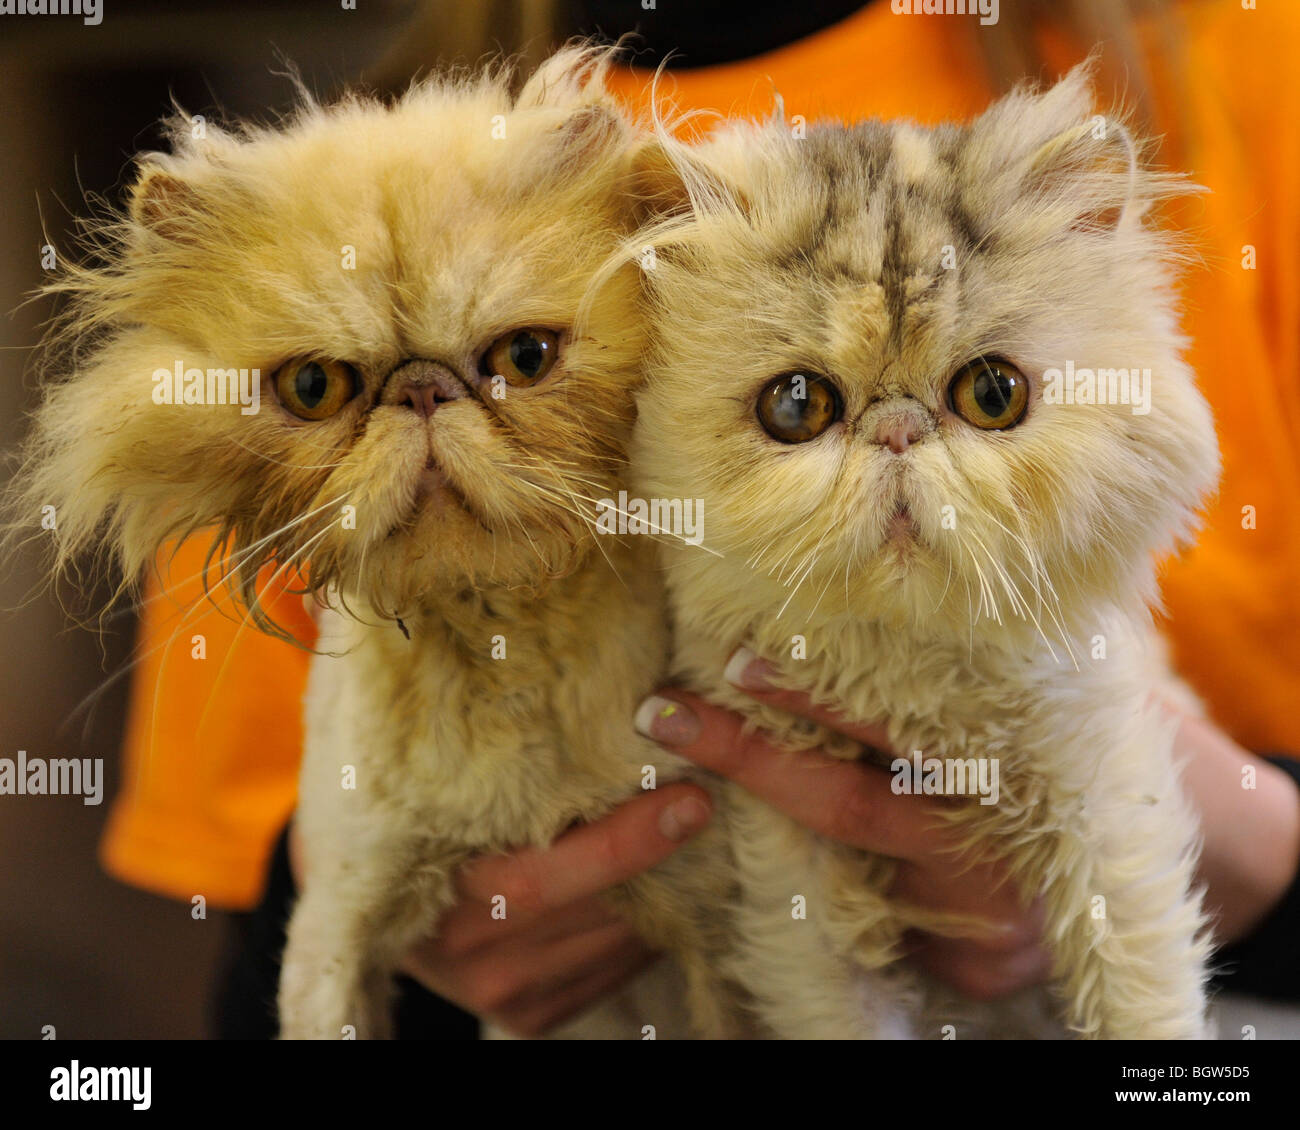 Funny Cats Faces High Resolution Stock Photography And Images Alamy